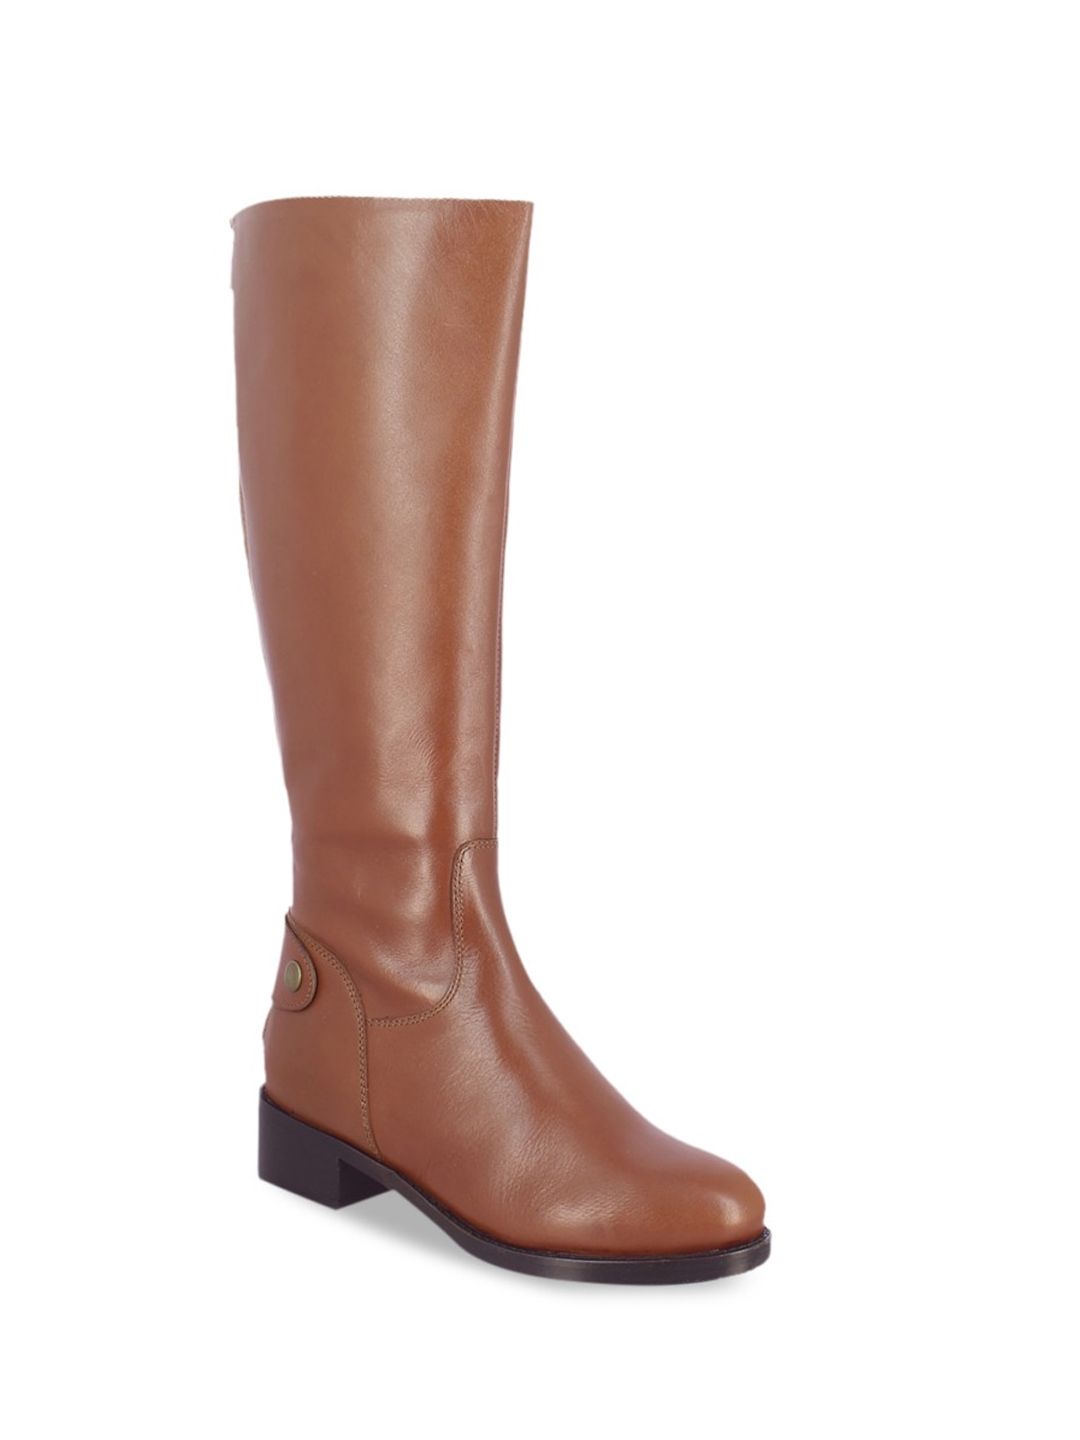 Saint G Tan Brown Leather Block Back Zip Long Boots Price in India